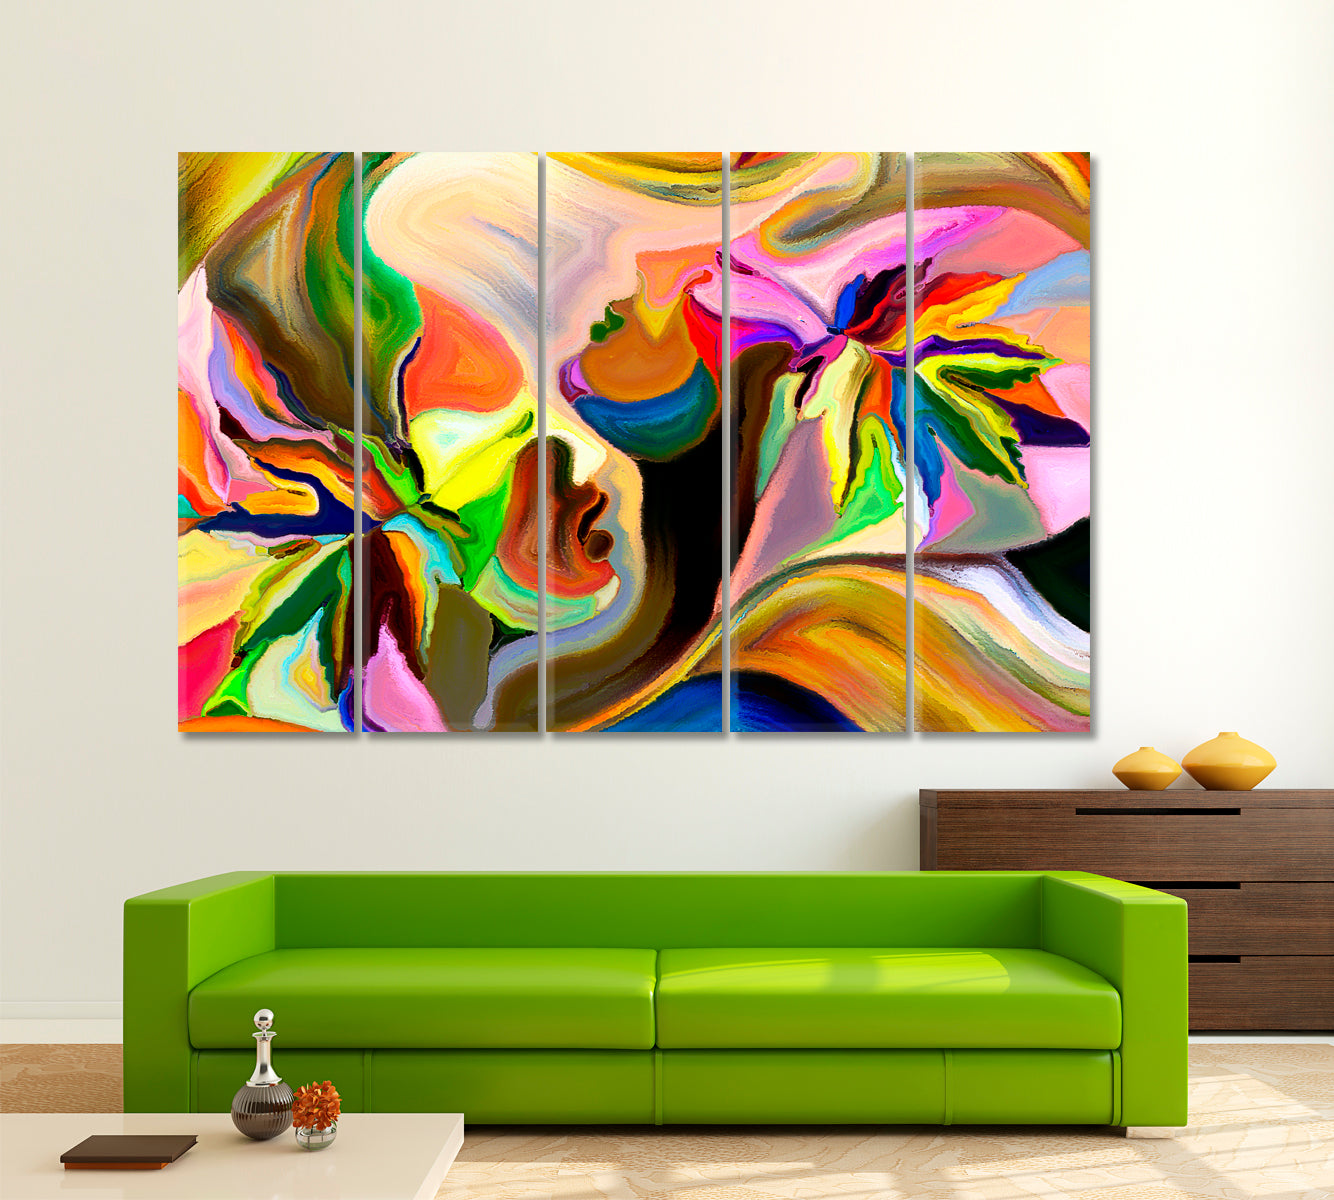 The Nature of Desire Abstract Art Print Artesty 5 panels 36" x 24" 